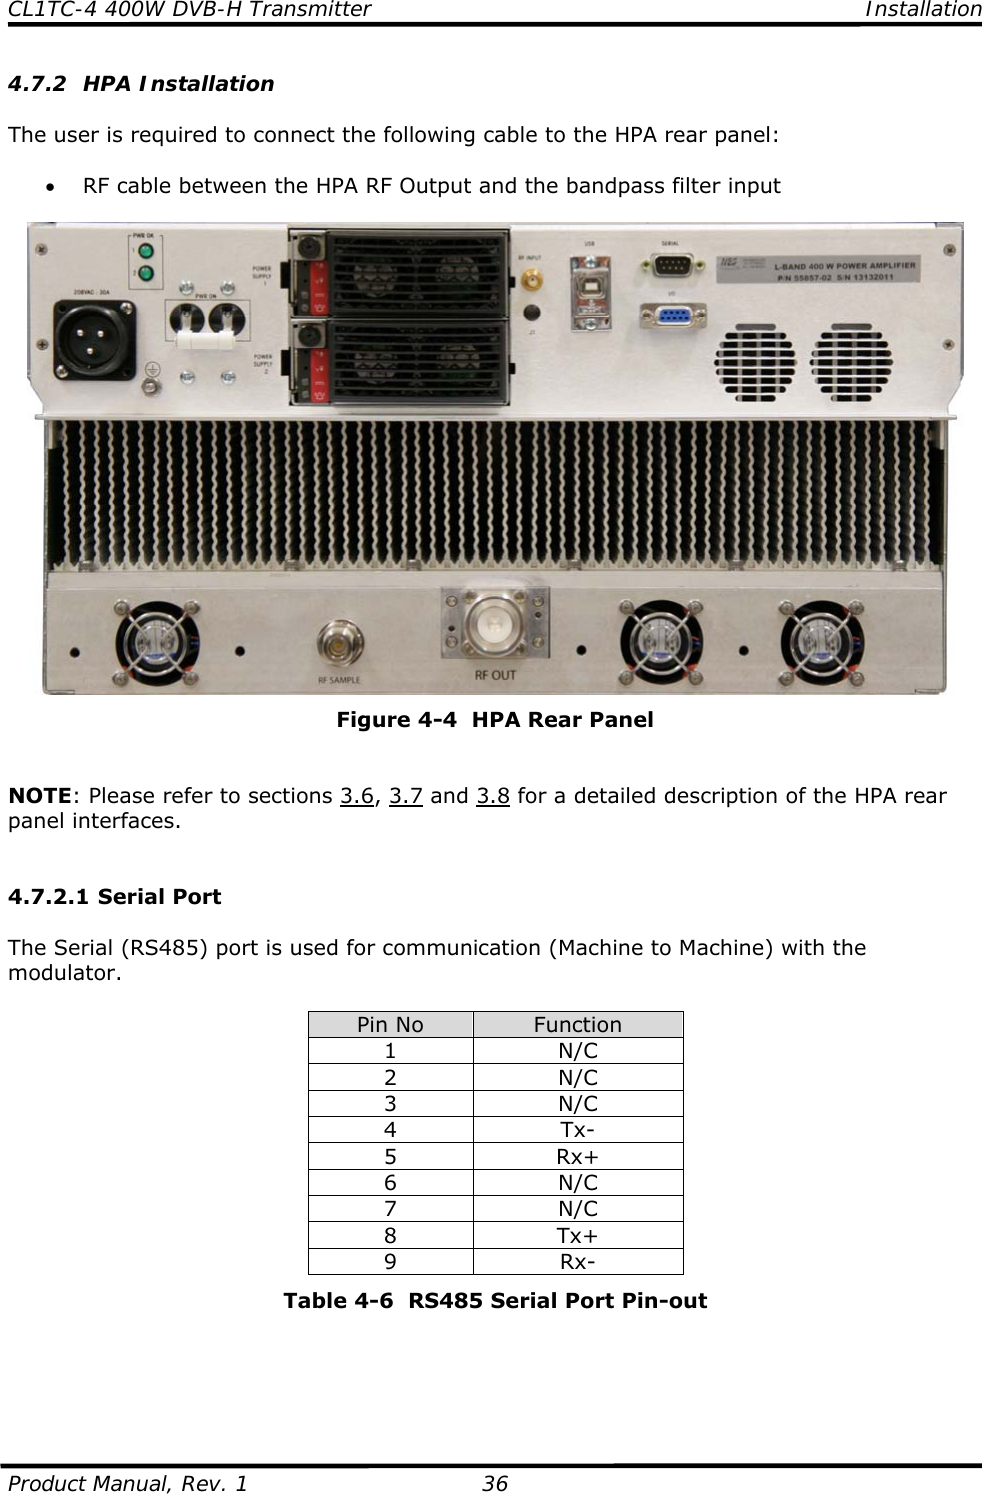 CL1TC-4 400W DVB-H Transmitter    Installation  Product Manual, Rev. 1  36 4.7.2 HPA Installation  The user is required to connect the following cable to the HPA rear panel:  • RF cable between the HPA RF Output and the bandpass filter input   Figure 4-4  HPA Rear Panel   NOTE: Please refer to sections 3.6, 3.7 and 3.8 for a detailed description of the HPA rear panel interfaces.   4.7.2.1 Serial Port  The Serial (RS485) port is used for communication (Machine to Machine) with the modulator.  Pin No  Function 1 N/C 2 N/C 3 N/C 4 Tx- 5 Rx+ 6 N/C 7 N/C 8 Tx+ 9 Rx- Table 4-6  RS485 Serial Port Pin-out     